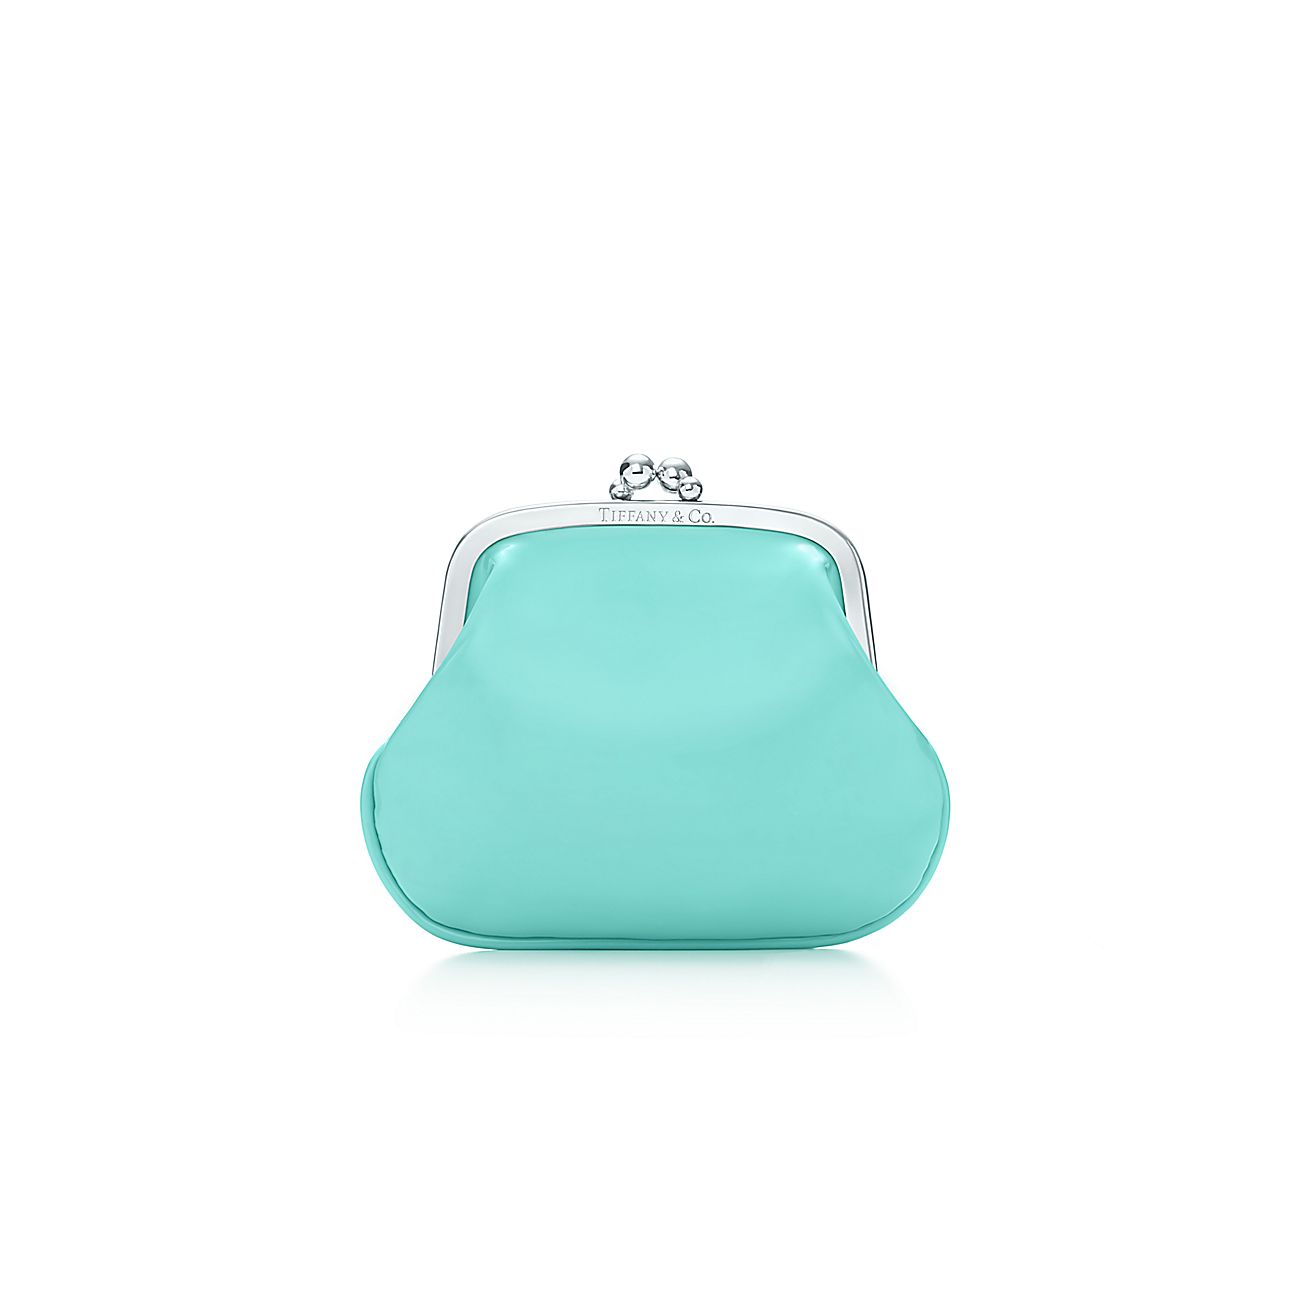 Tiffany And Co Heart Coin Purse | IUCN Water